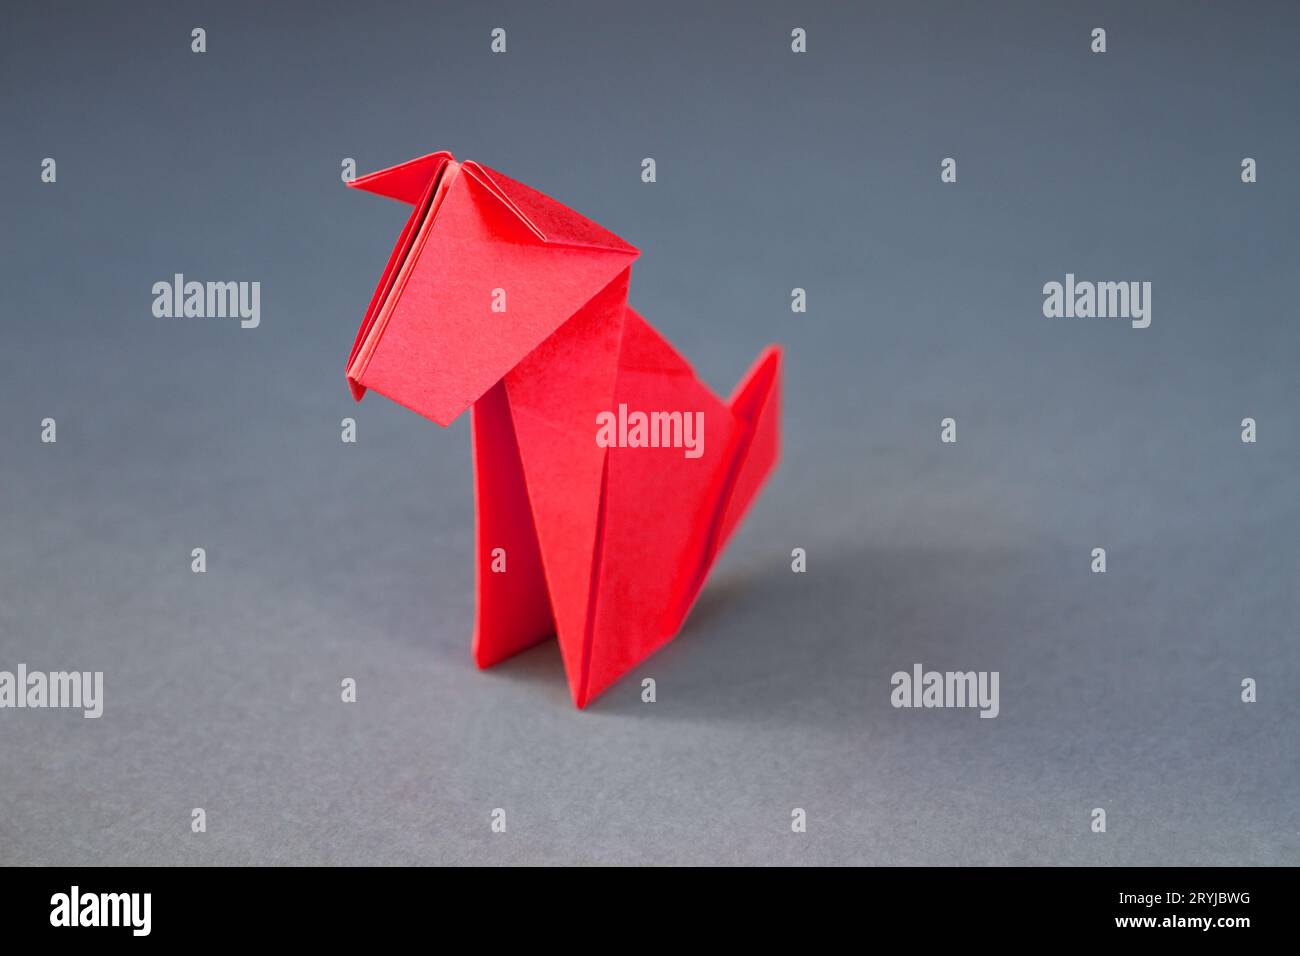 Red paper dog origami isolated on a grey background Stock Photo